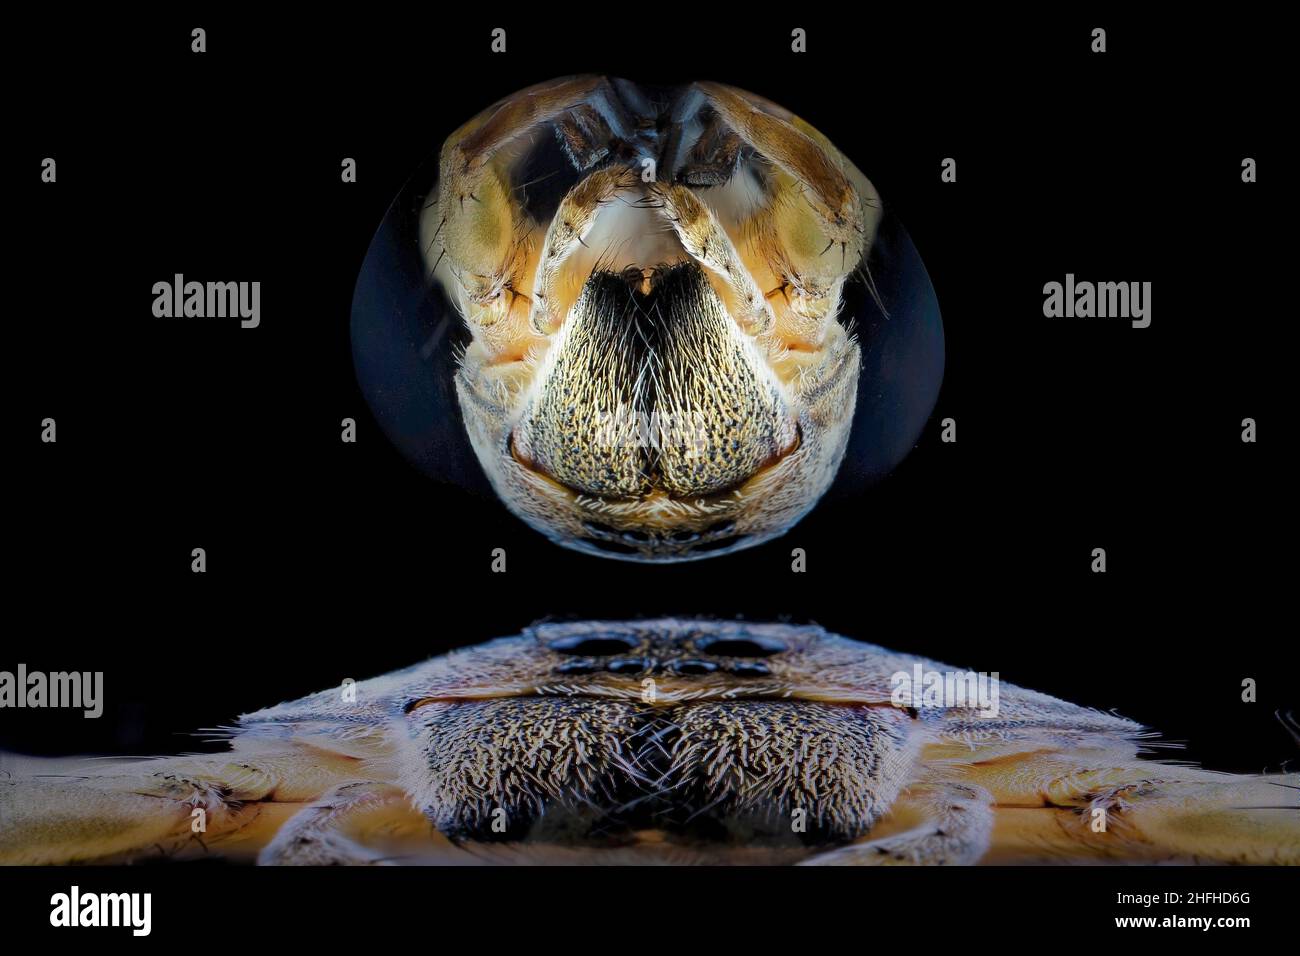 The image of a wolf spider on a surface tablet reflected onto the back of a shiny spoon against a black background Stock Photo